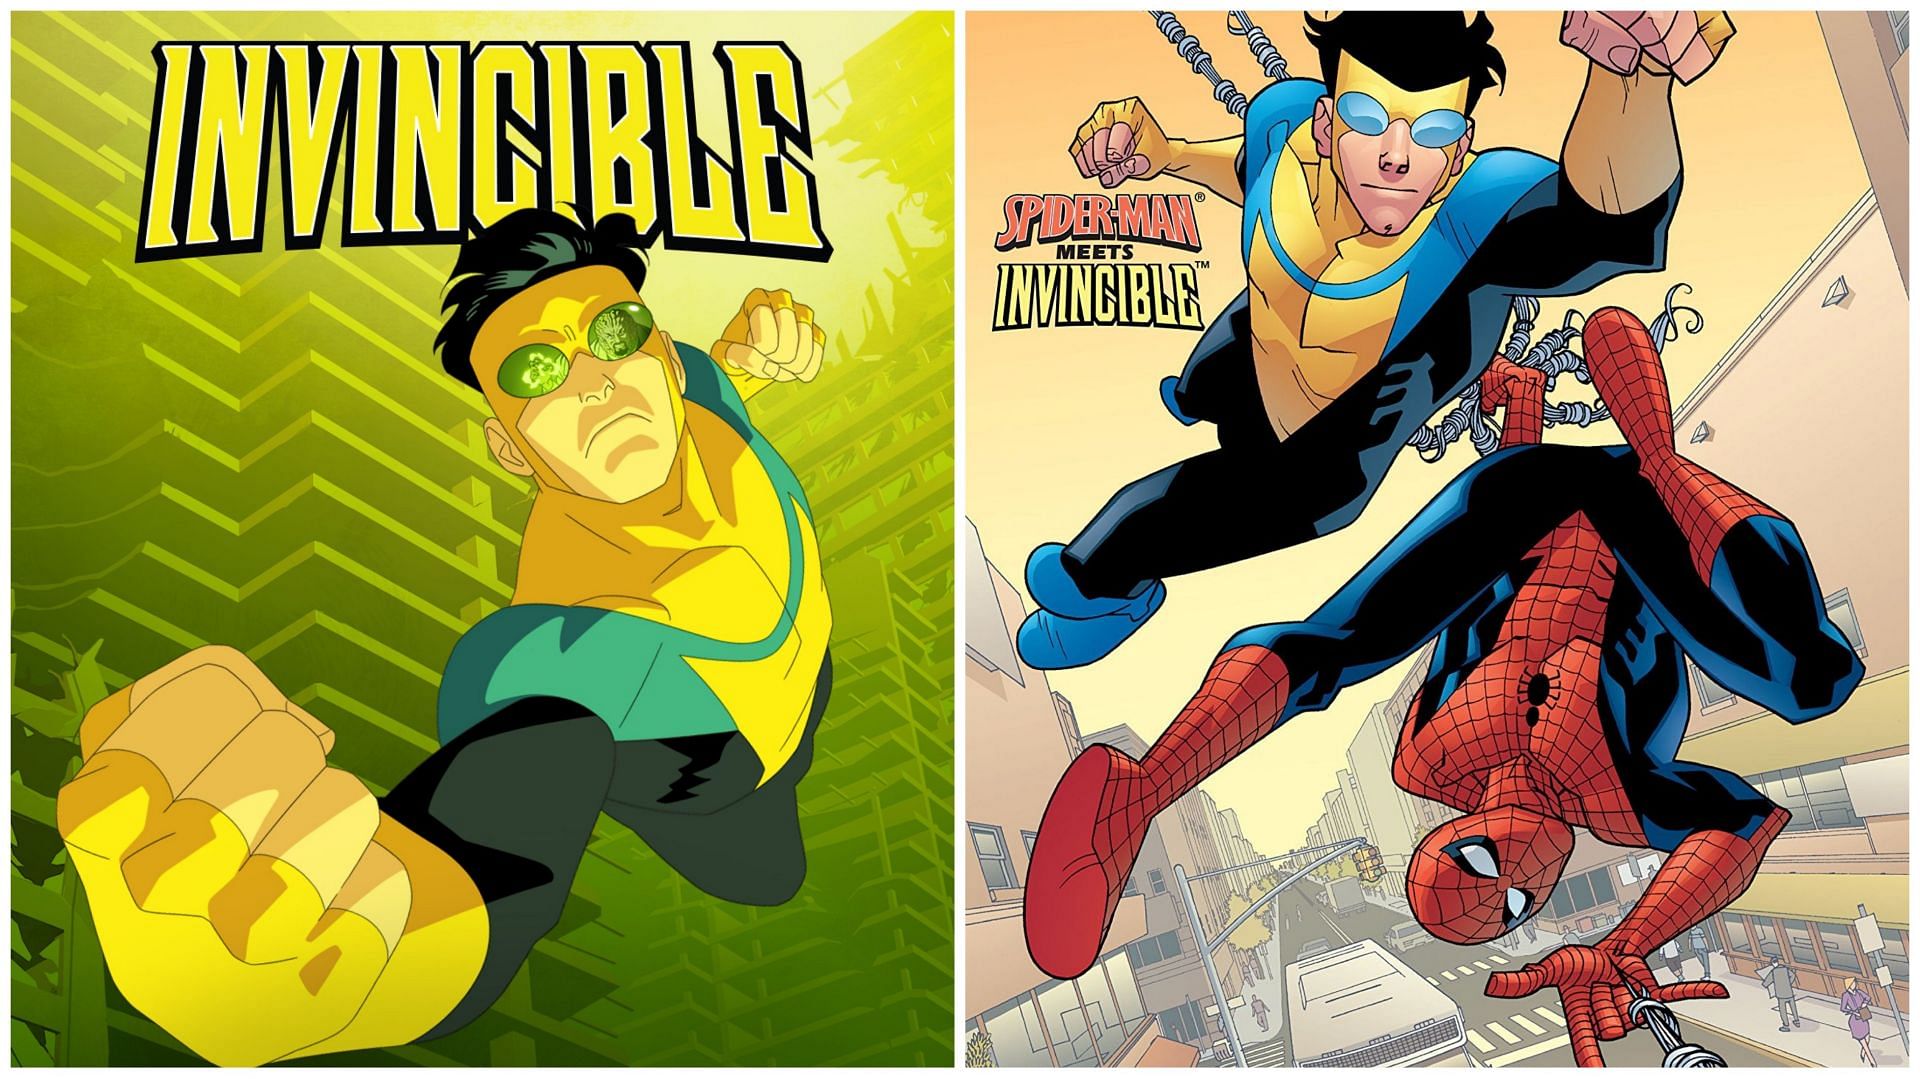 Poster for Invincible Season 2 and Marvel Team-Up #14 (Image via @InvincibleHQ on X and Marvel Comics)